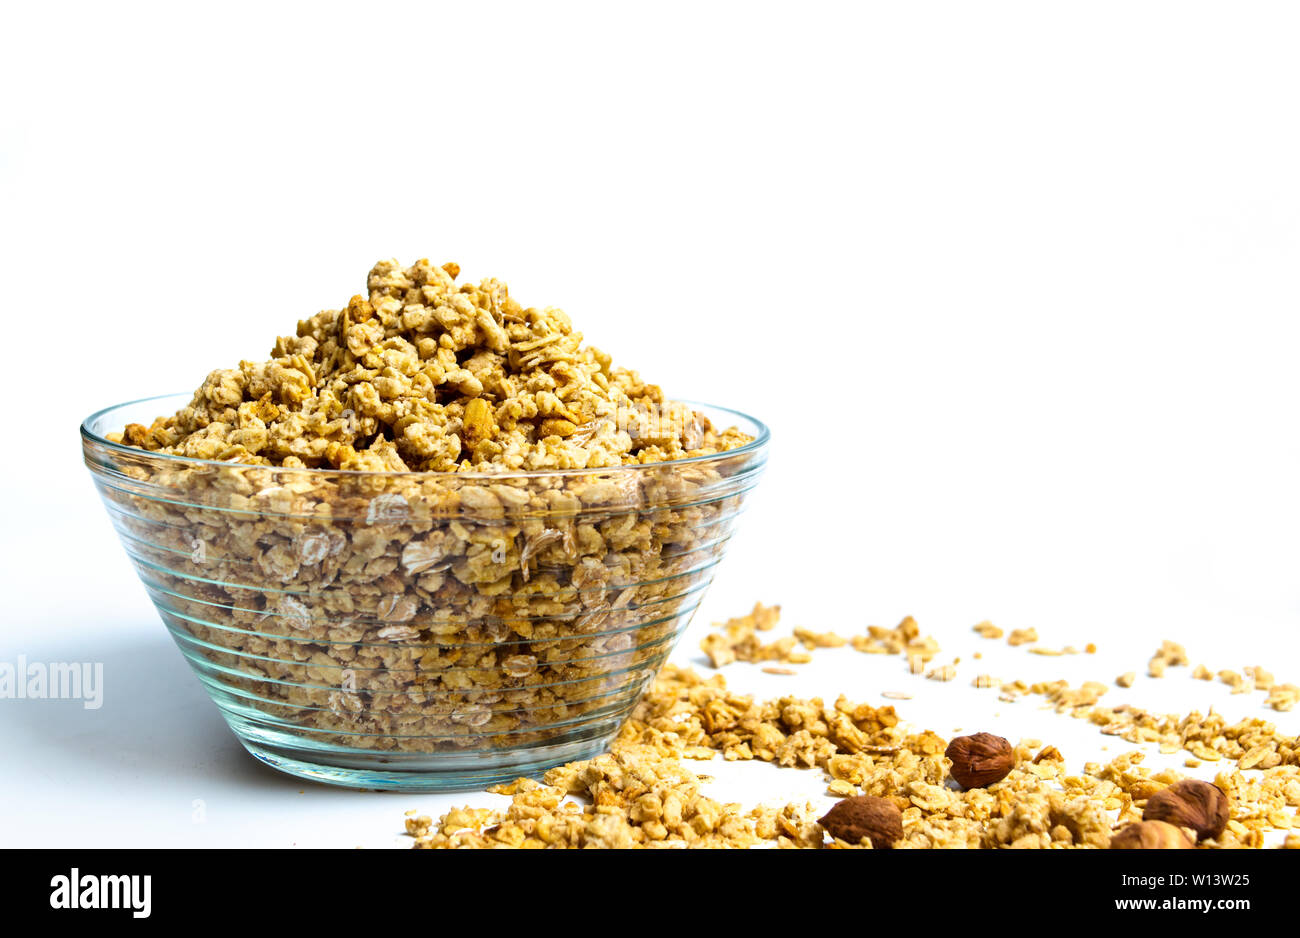 Various cereals and granola mix in a bowl top view Stock Photo